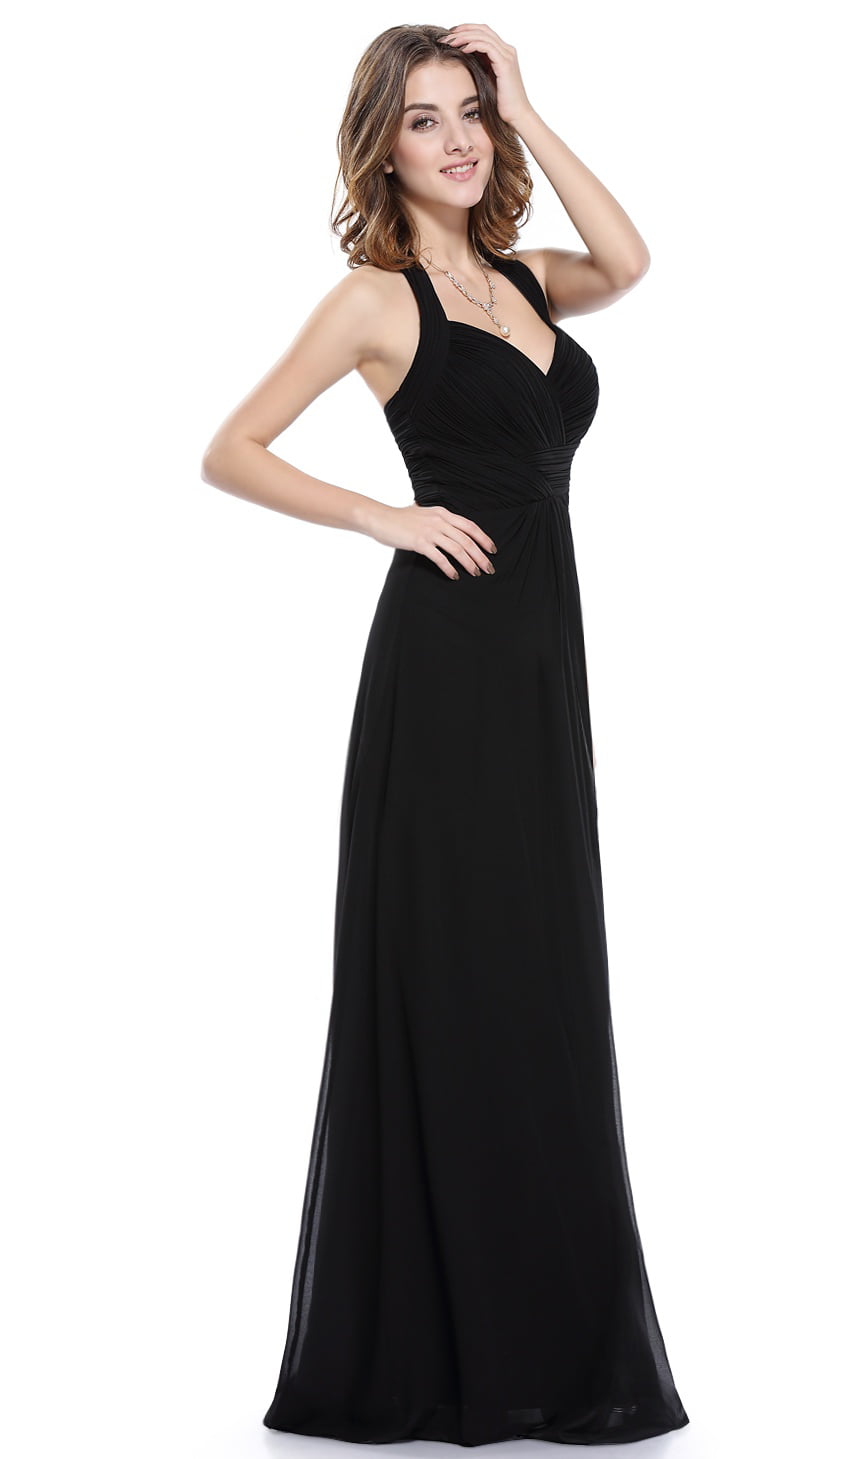 Ever-Pretty Backless Long Evening Gown Halter V-neck Bridesmaid Dresses 08487 